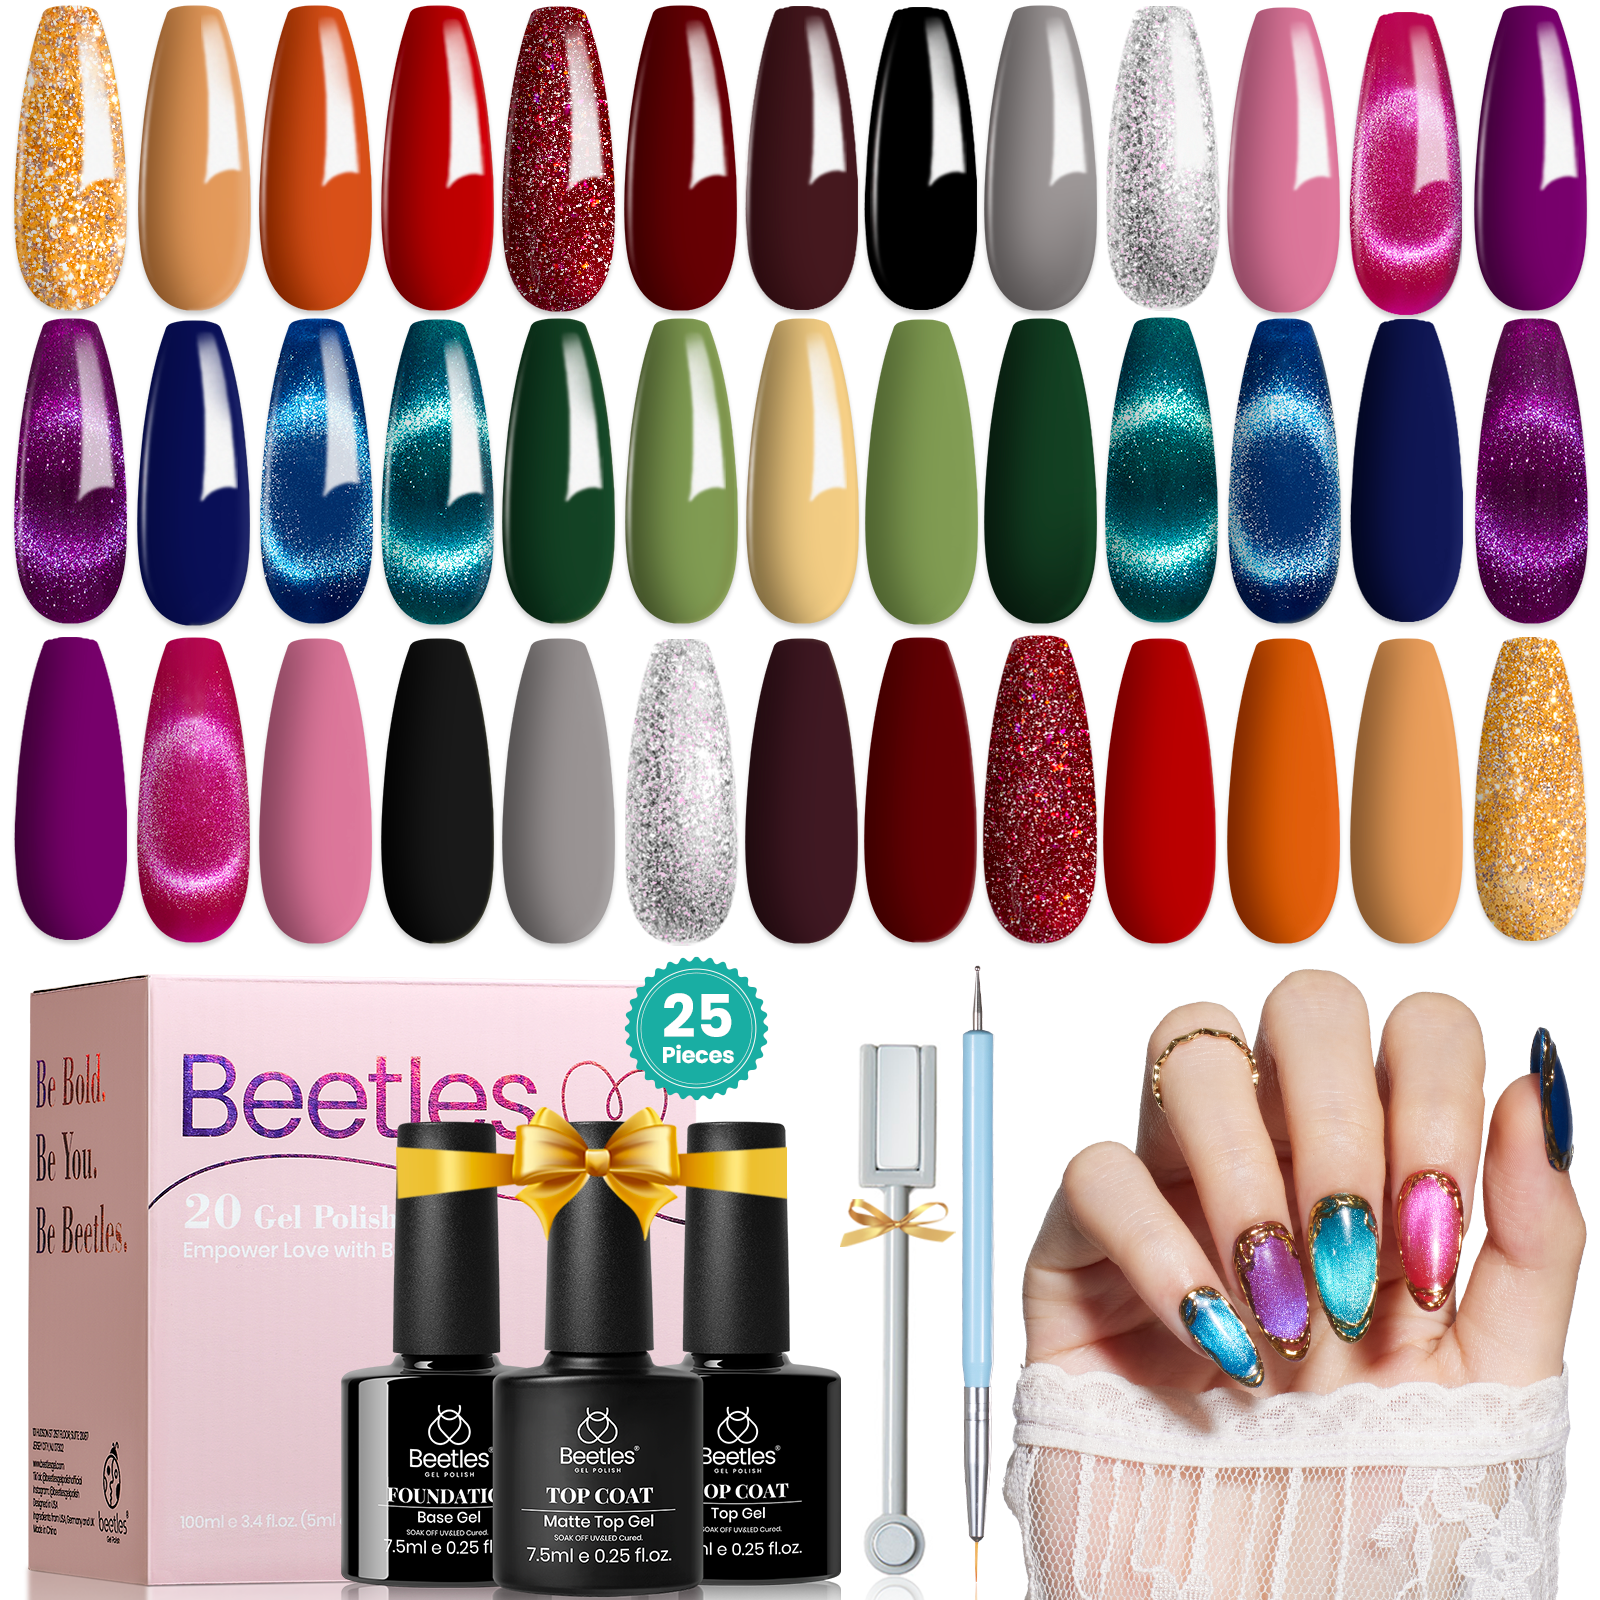 BeautyQua Professional Set of Poly gel Nail Art Kit includes 100 Tips poly gel  Nails , 1 Dual head poly gel Applicator Brush, 5 Nail holding Clips - Price  in India, Buy